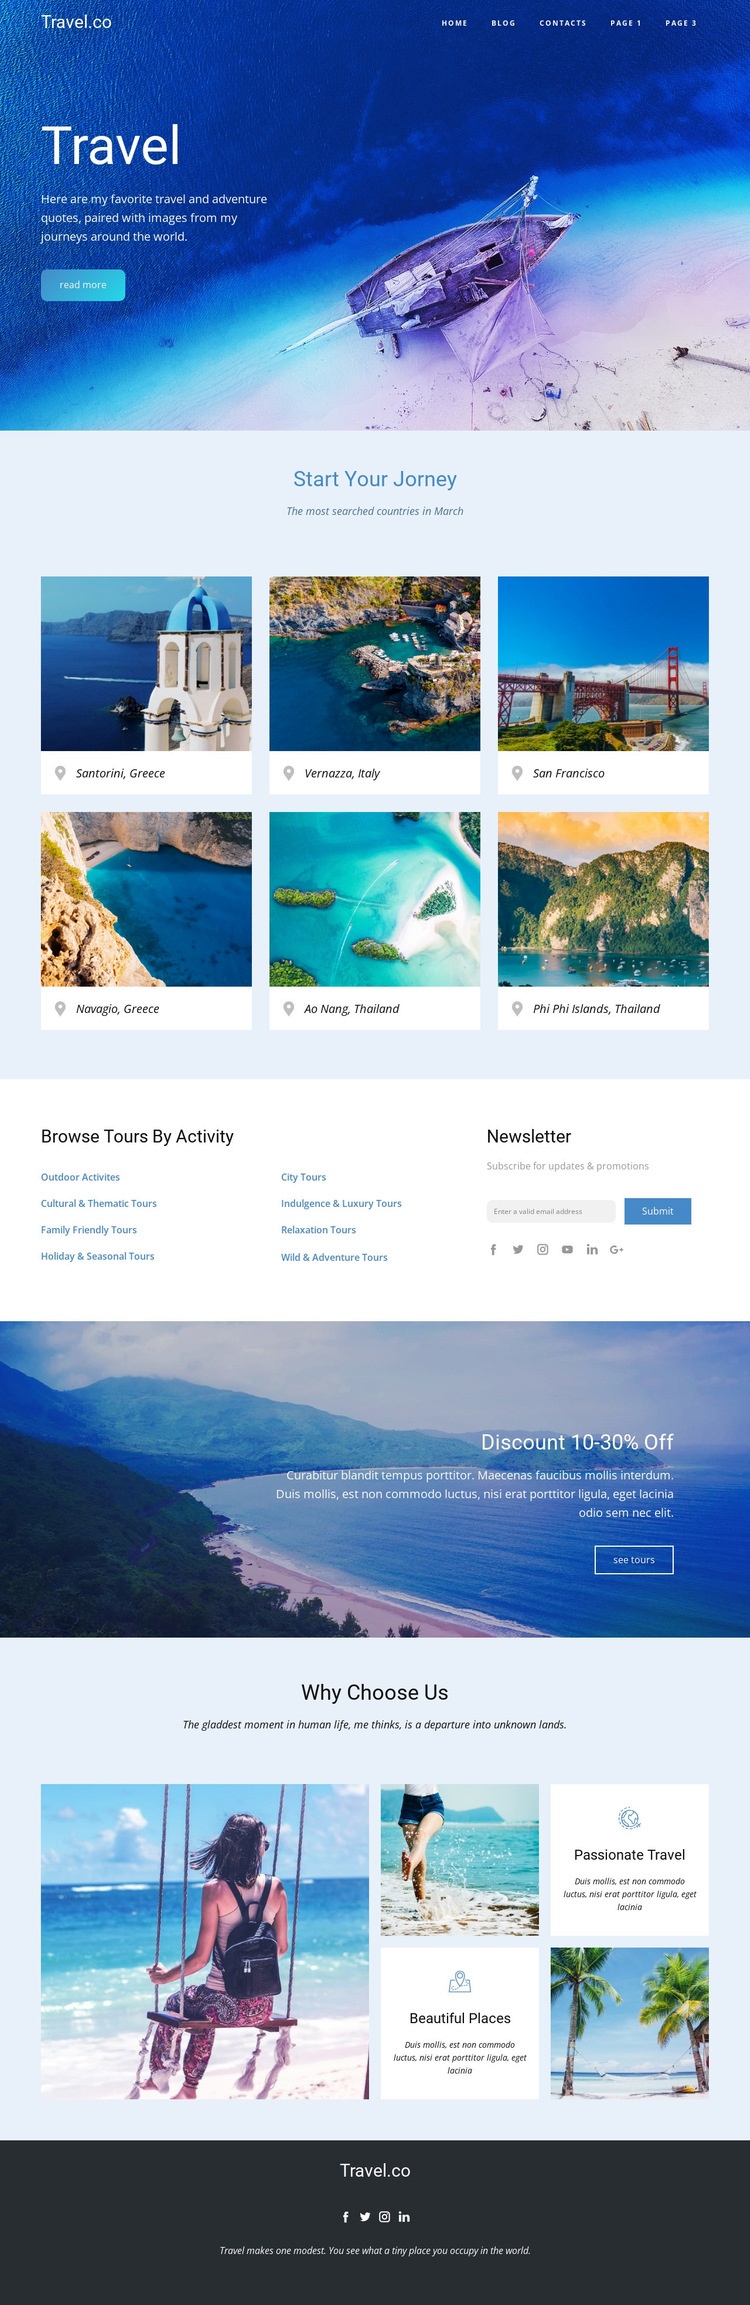 Amazing ideas for travel Html Code Example